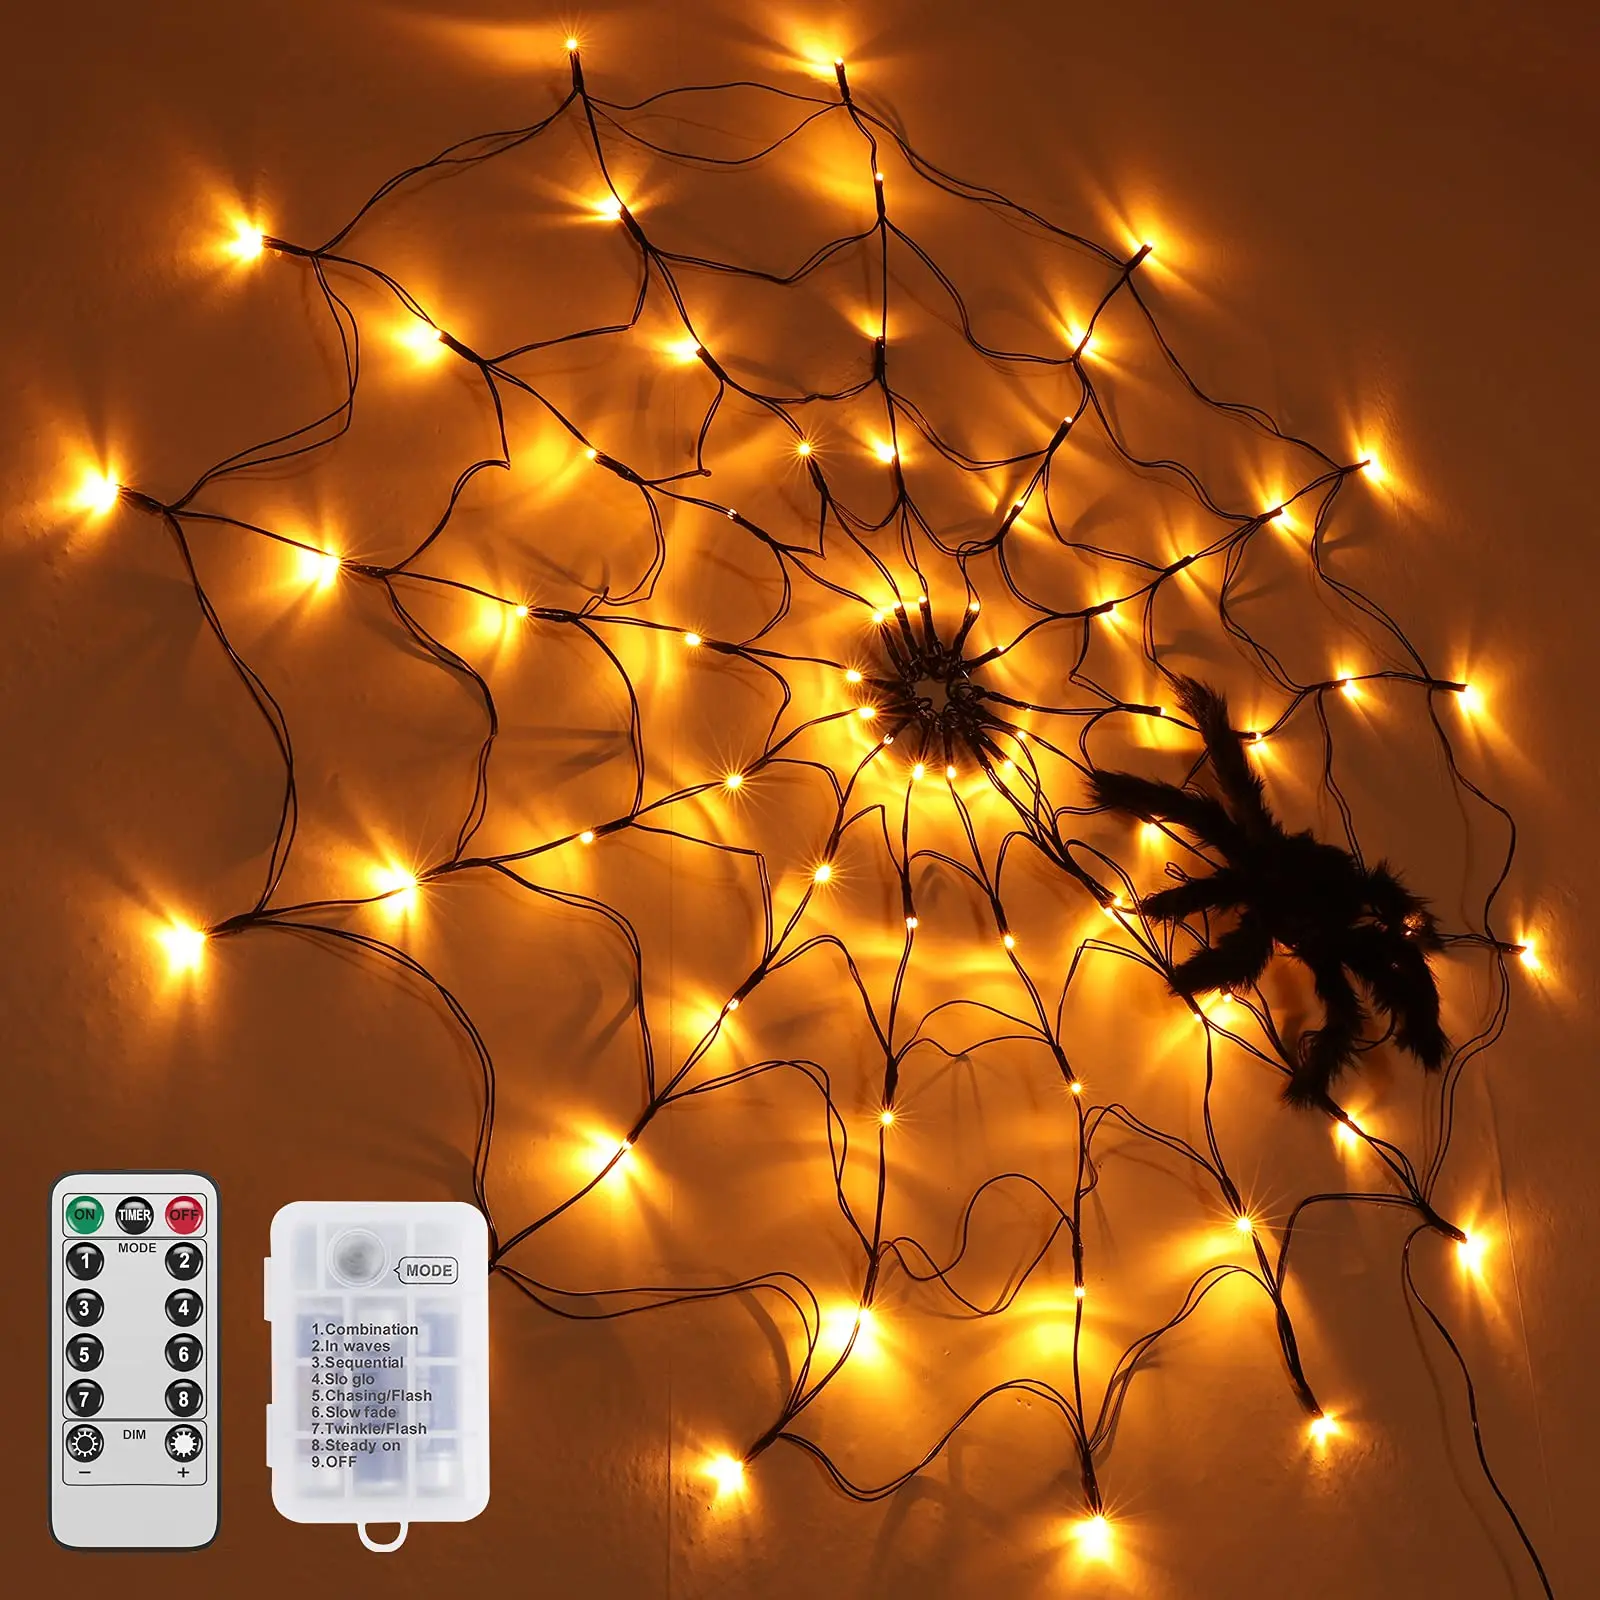 Halloween Decorations Lights 70 LED Spider Web Lights with Plush Black Spider Remote Control for Party Yard Bar Haunted House